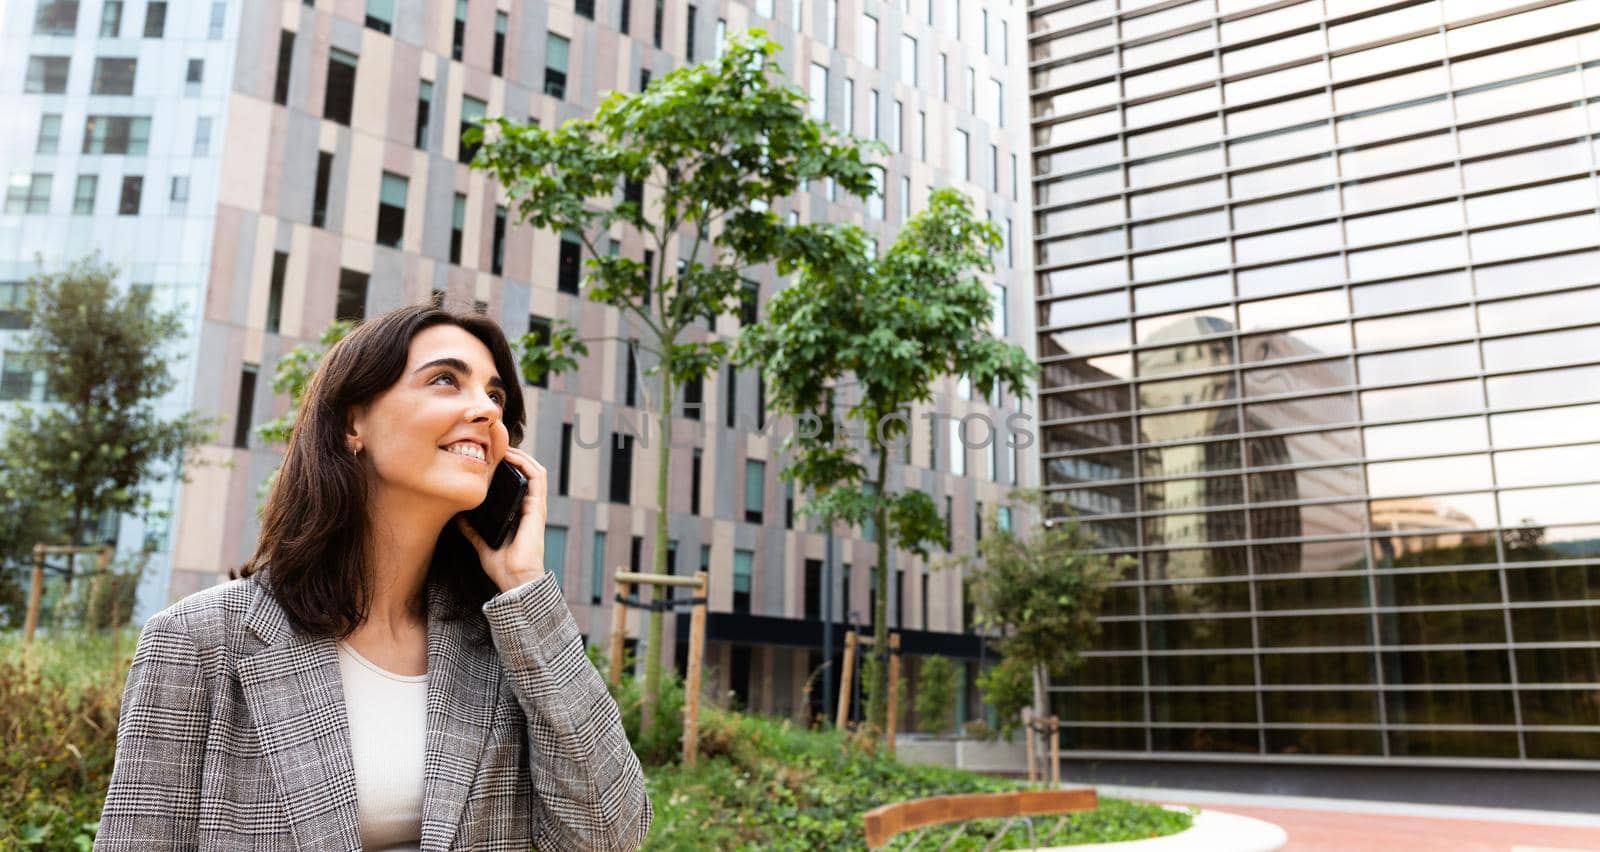 Panoramic image of smiling young business woman talking on cellphone next to office buildings. Copy space. Business and technology concept.